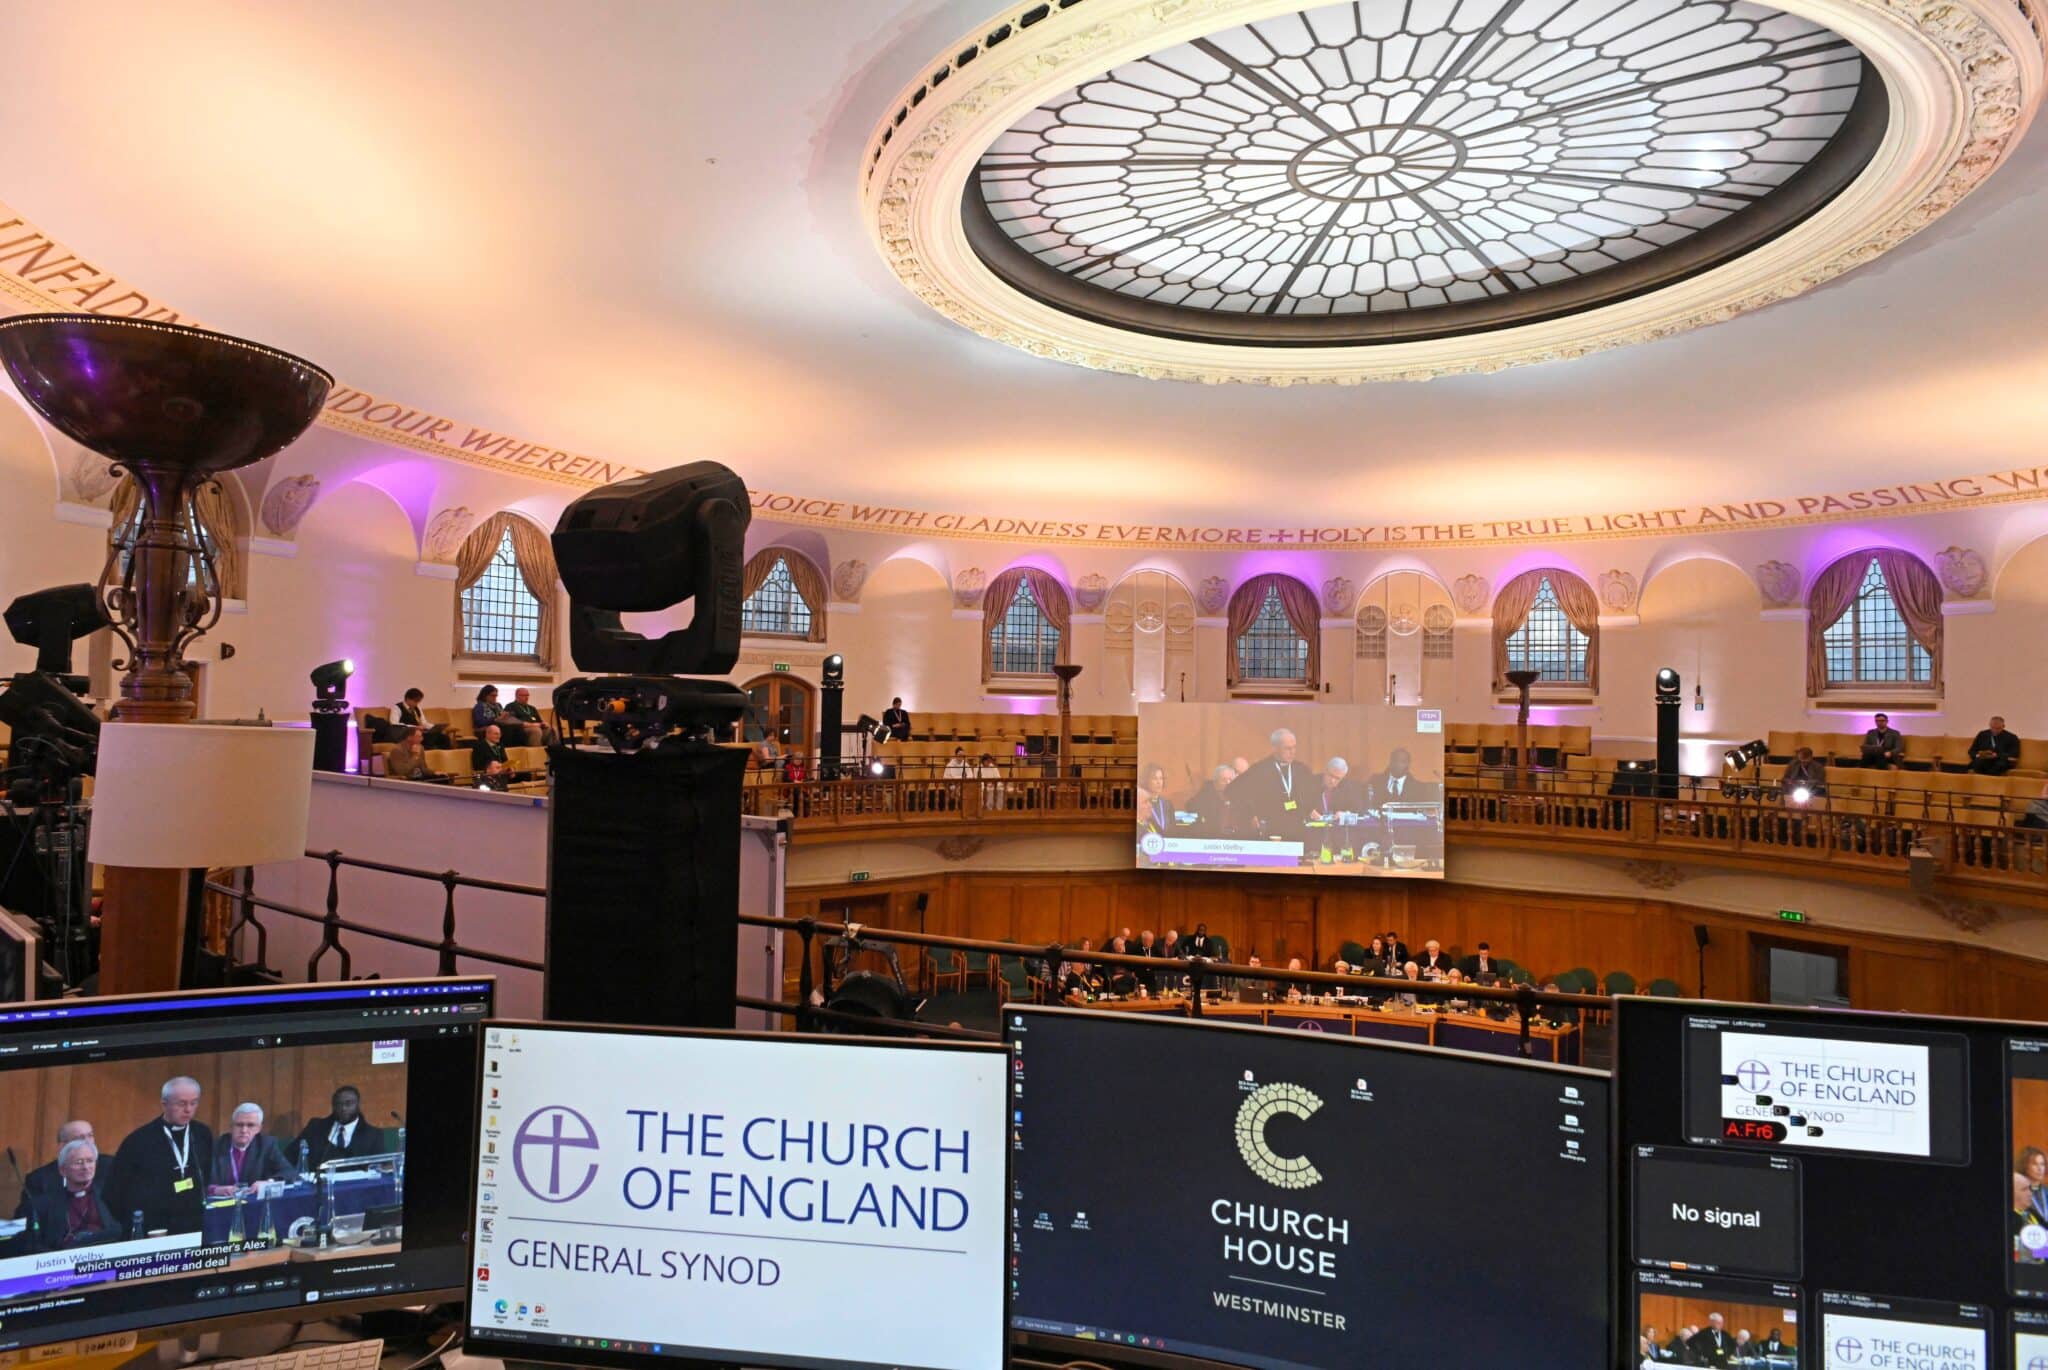 Anglican Archbishop Justin Welby is displayed on a screen during the General Synod 2023 in London Feb. 9. The Church of England is planning to debate the introduction of liturgy that refers to persons of the Holy Trinity “in a non-gendered way” instead of using male pronouns. (OSV New/Toby Melville, Reuters)